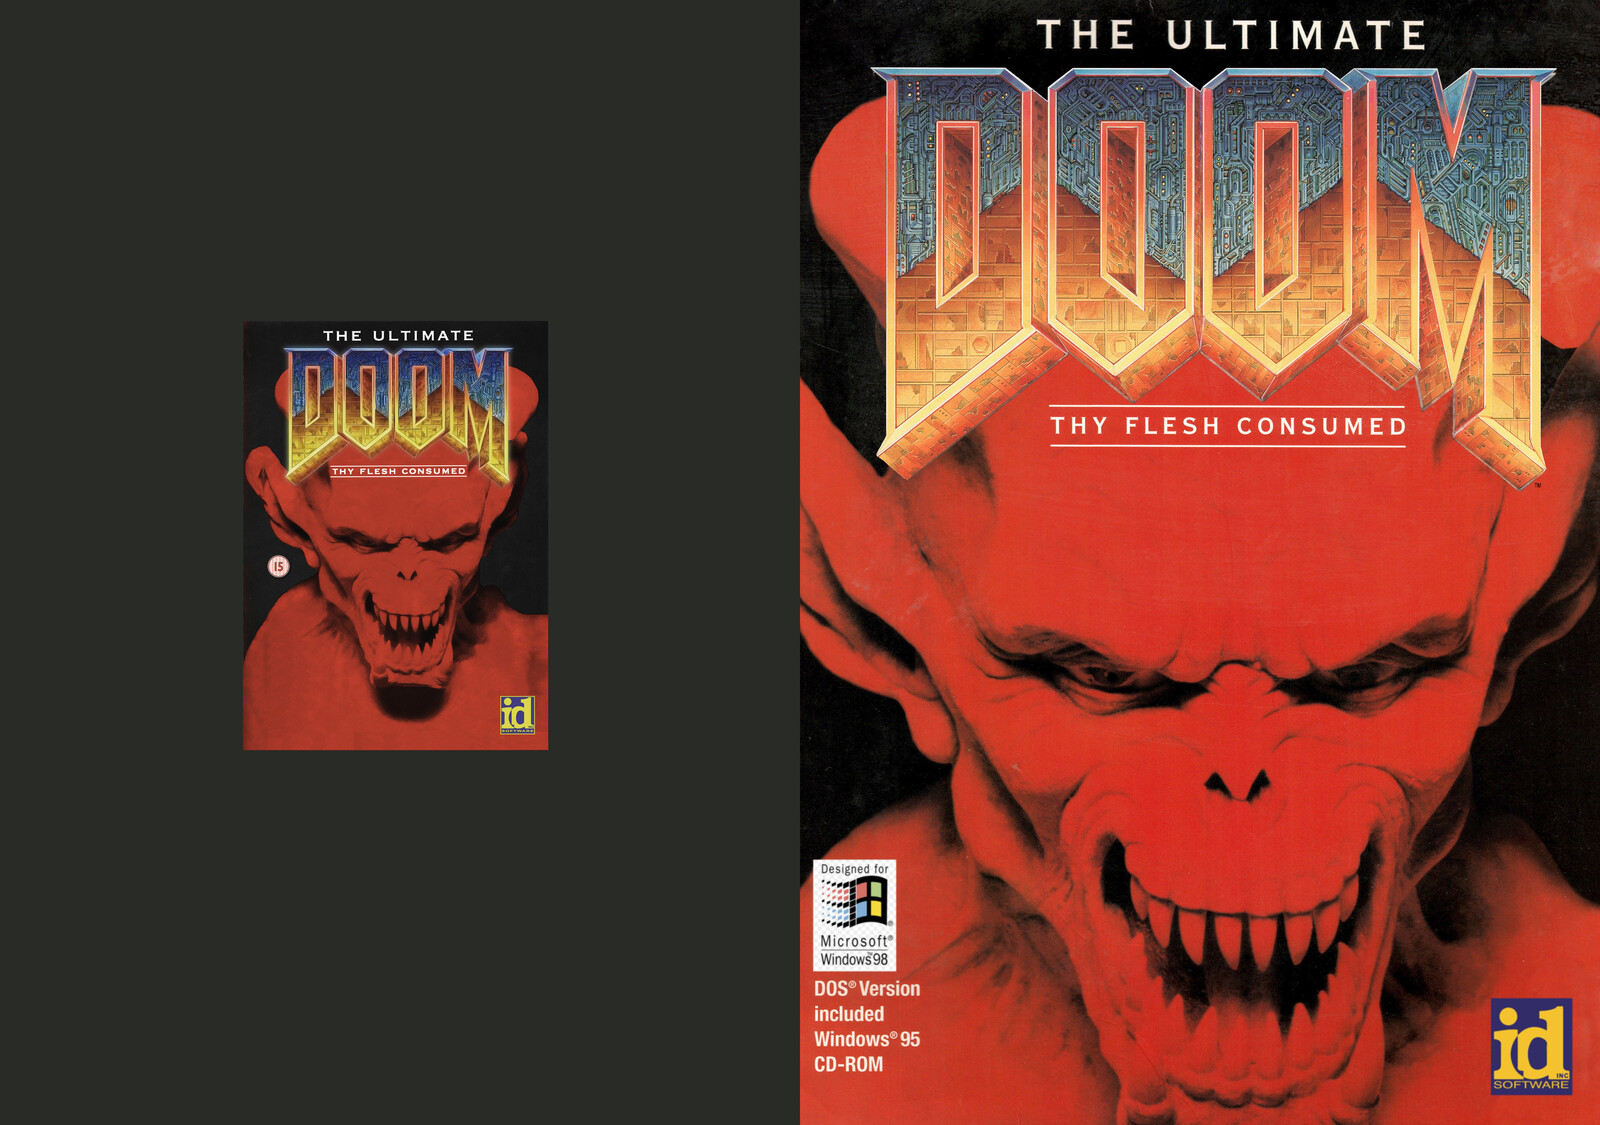 The Ultimate Doom - Thy Flesh Consumed (the lost episode, art by Gregor Punchatz) (scan cover vs. retouched)